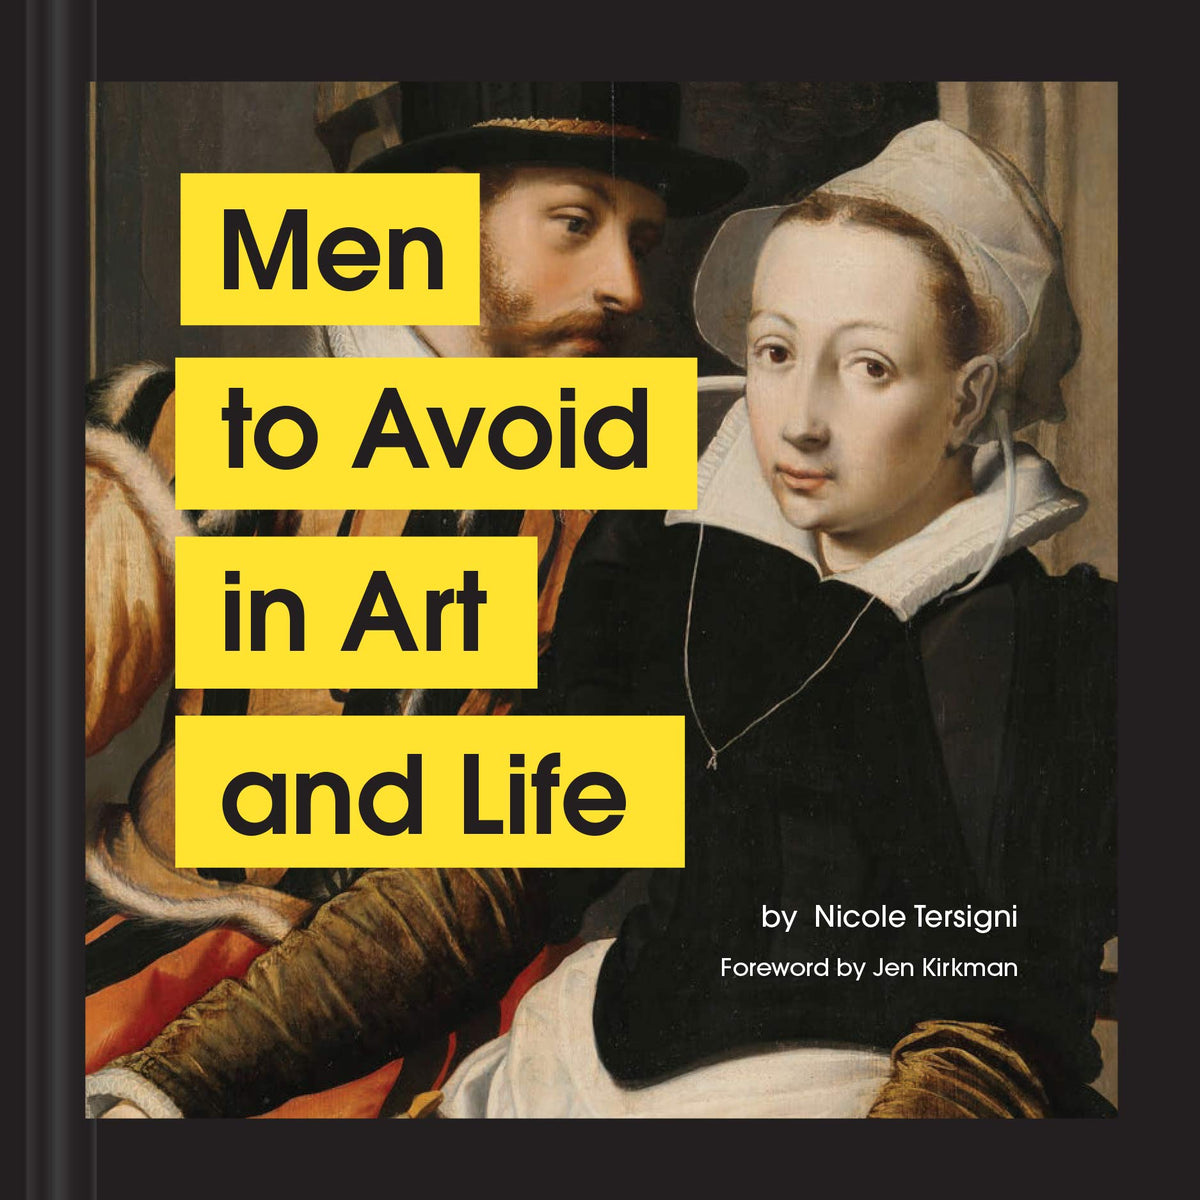 Man to Avoid in Art and Life by Nicole Tersigni